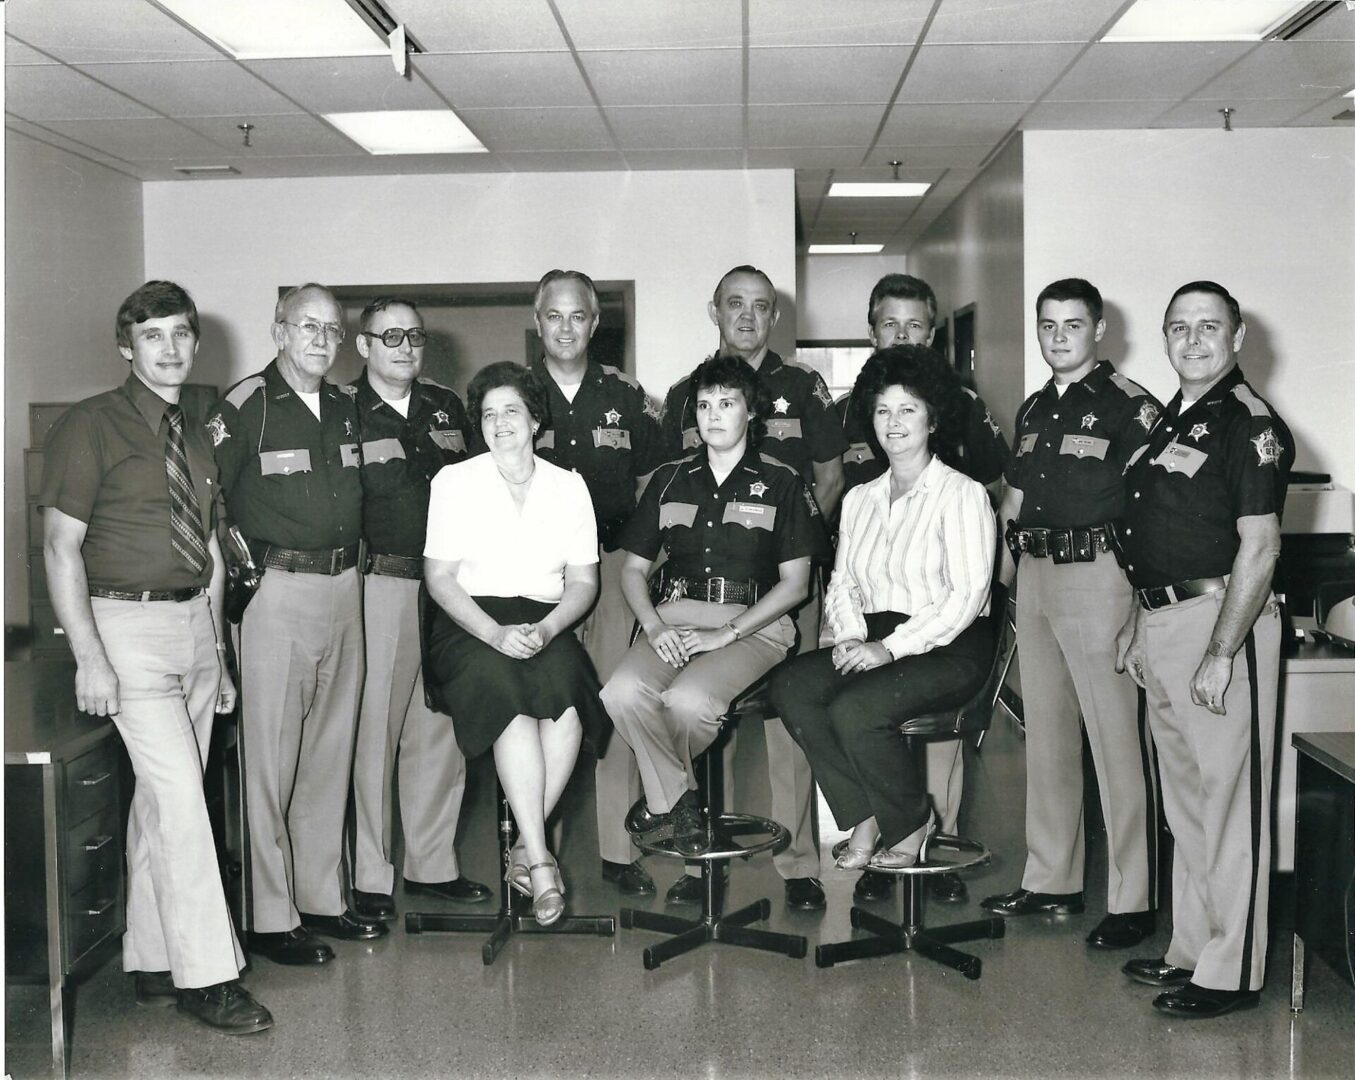 Sheriff's Department before color